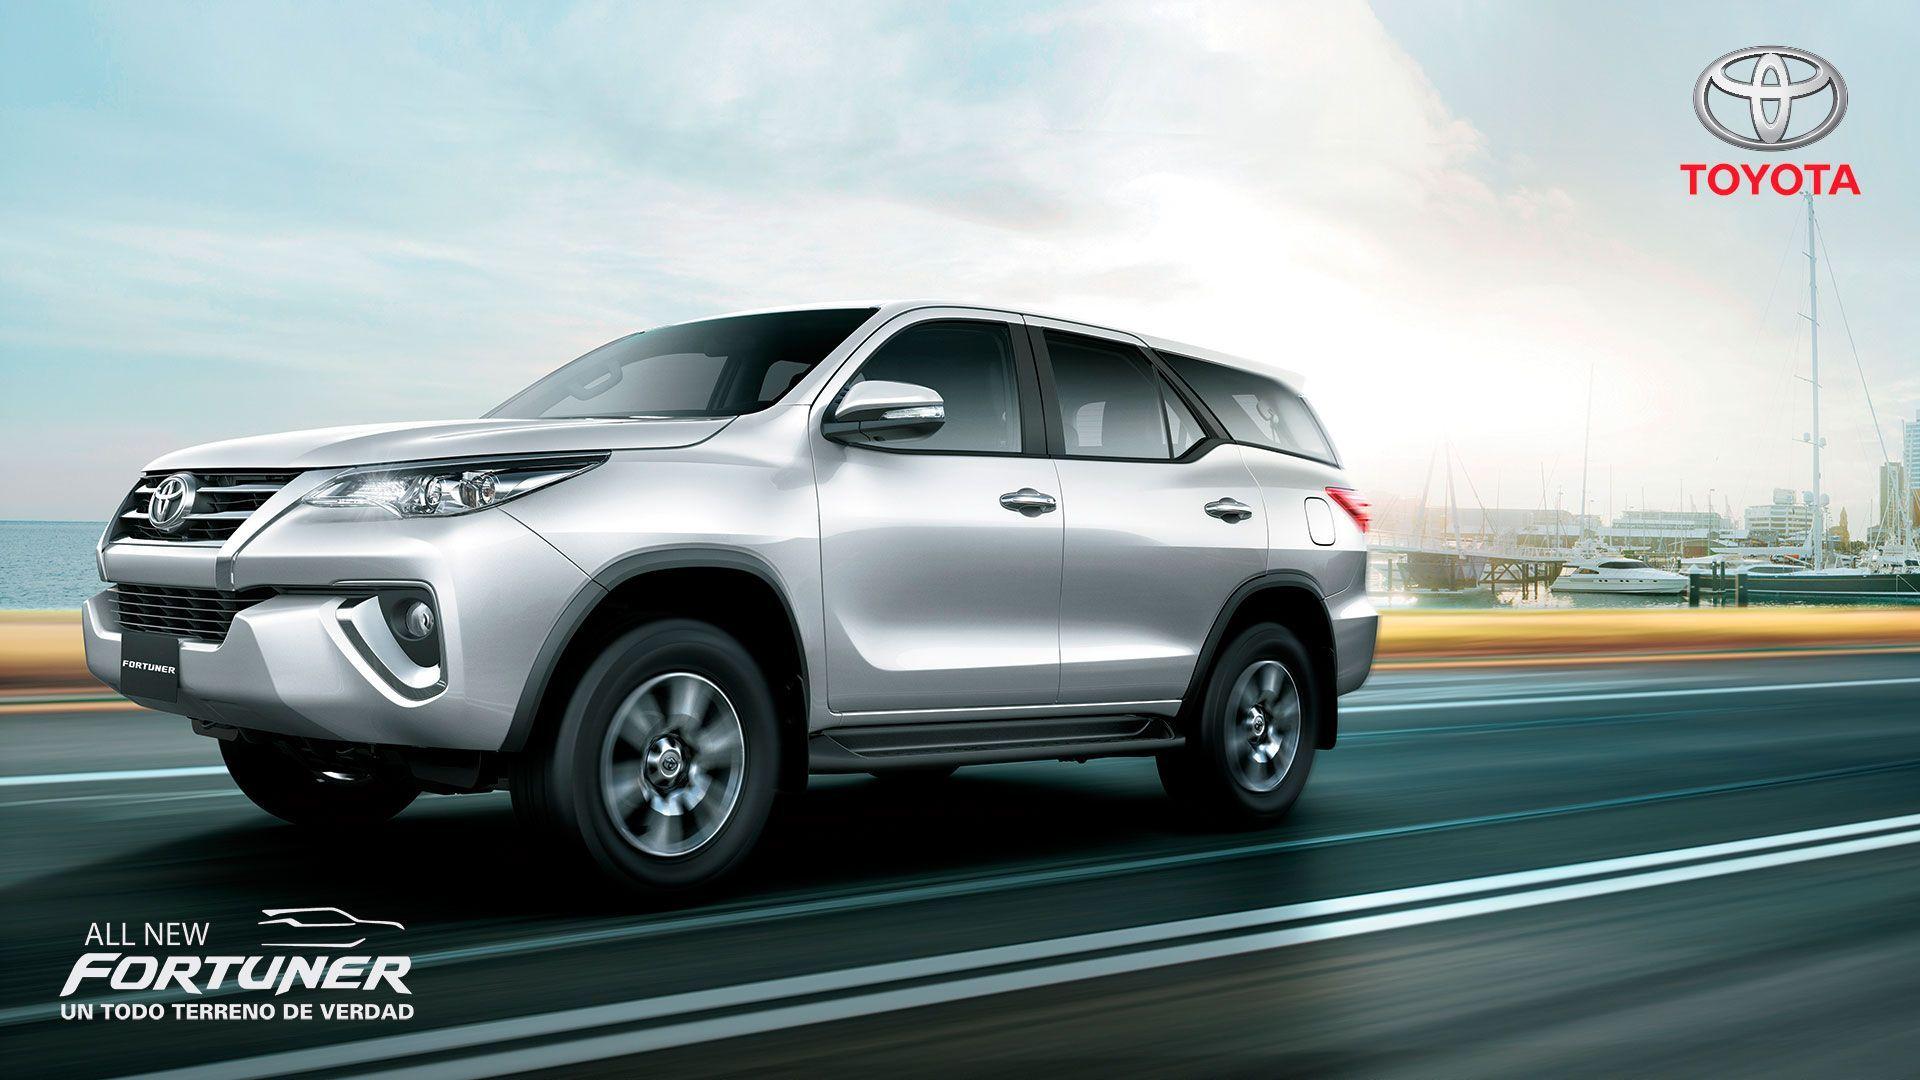 Fortuner Hd Wallpaper For Iphone